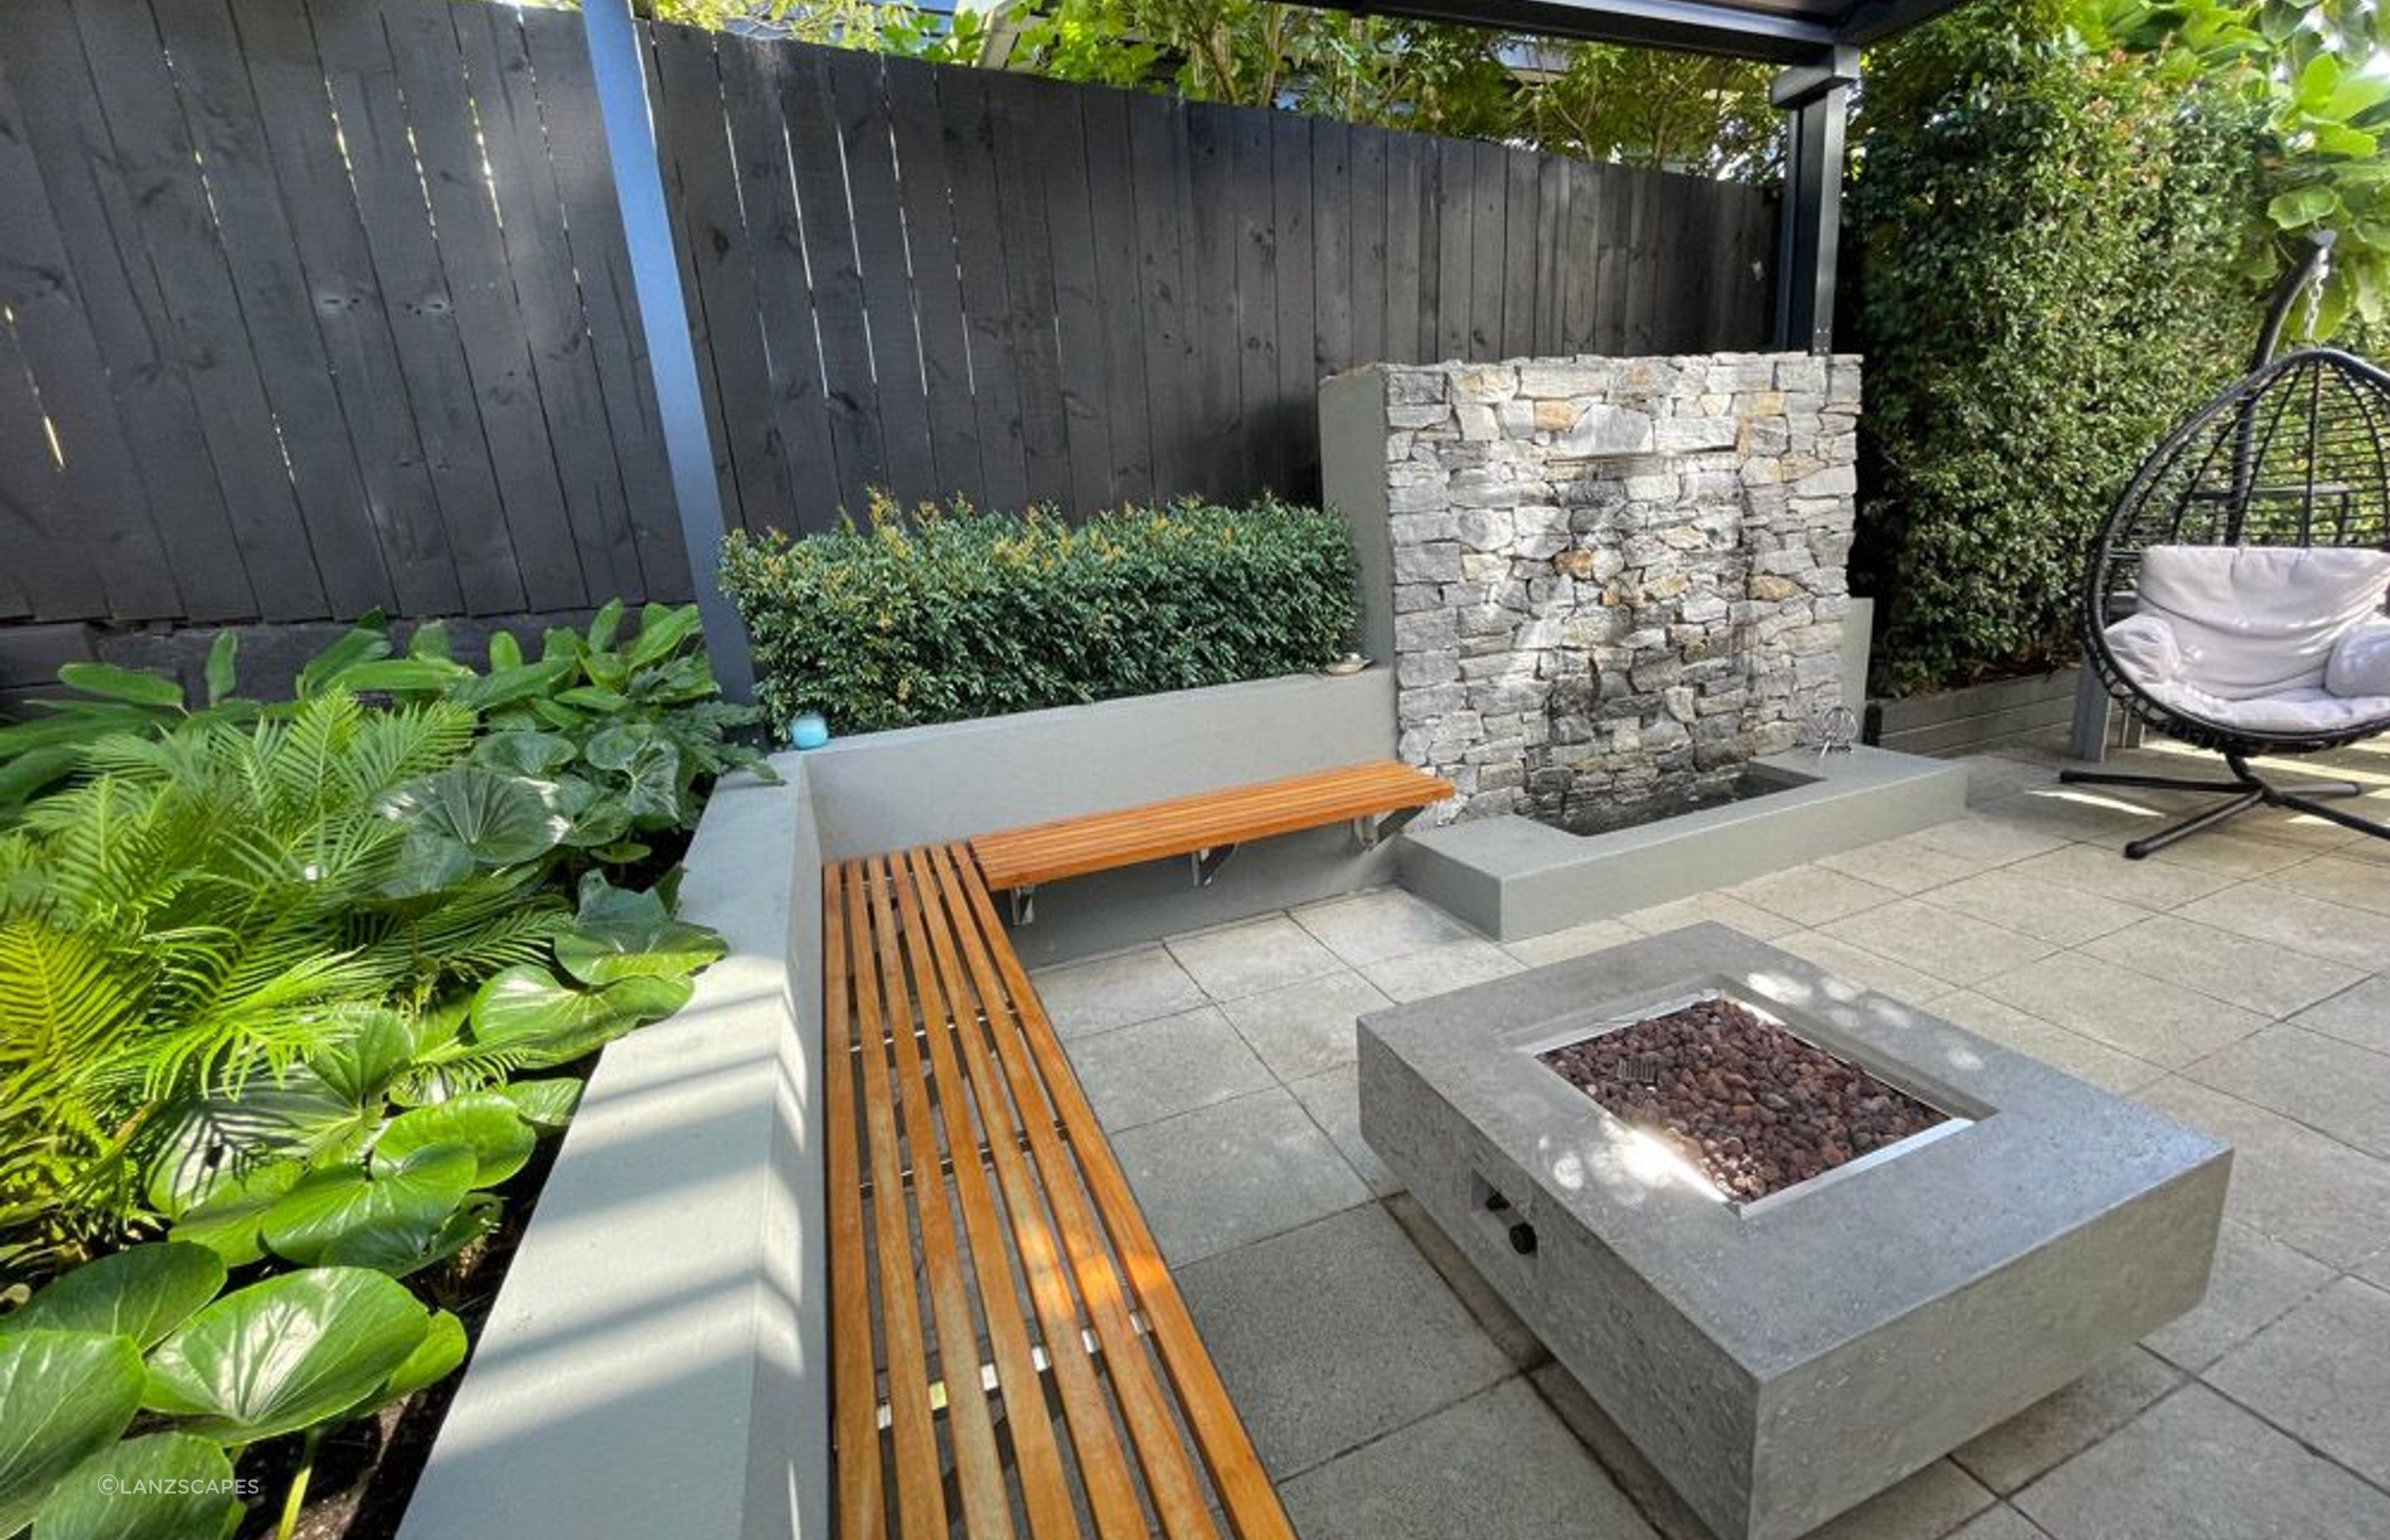 Covered patio with fire pit and water feature